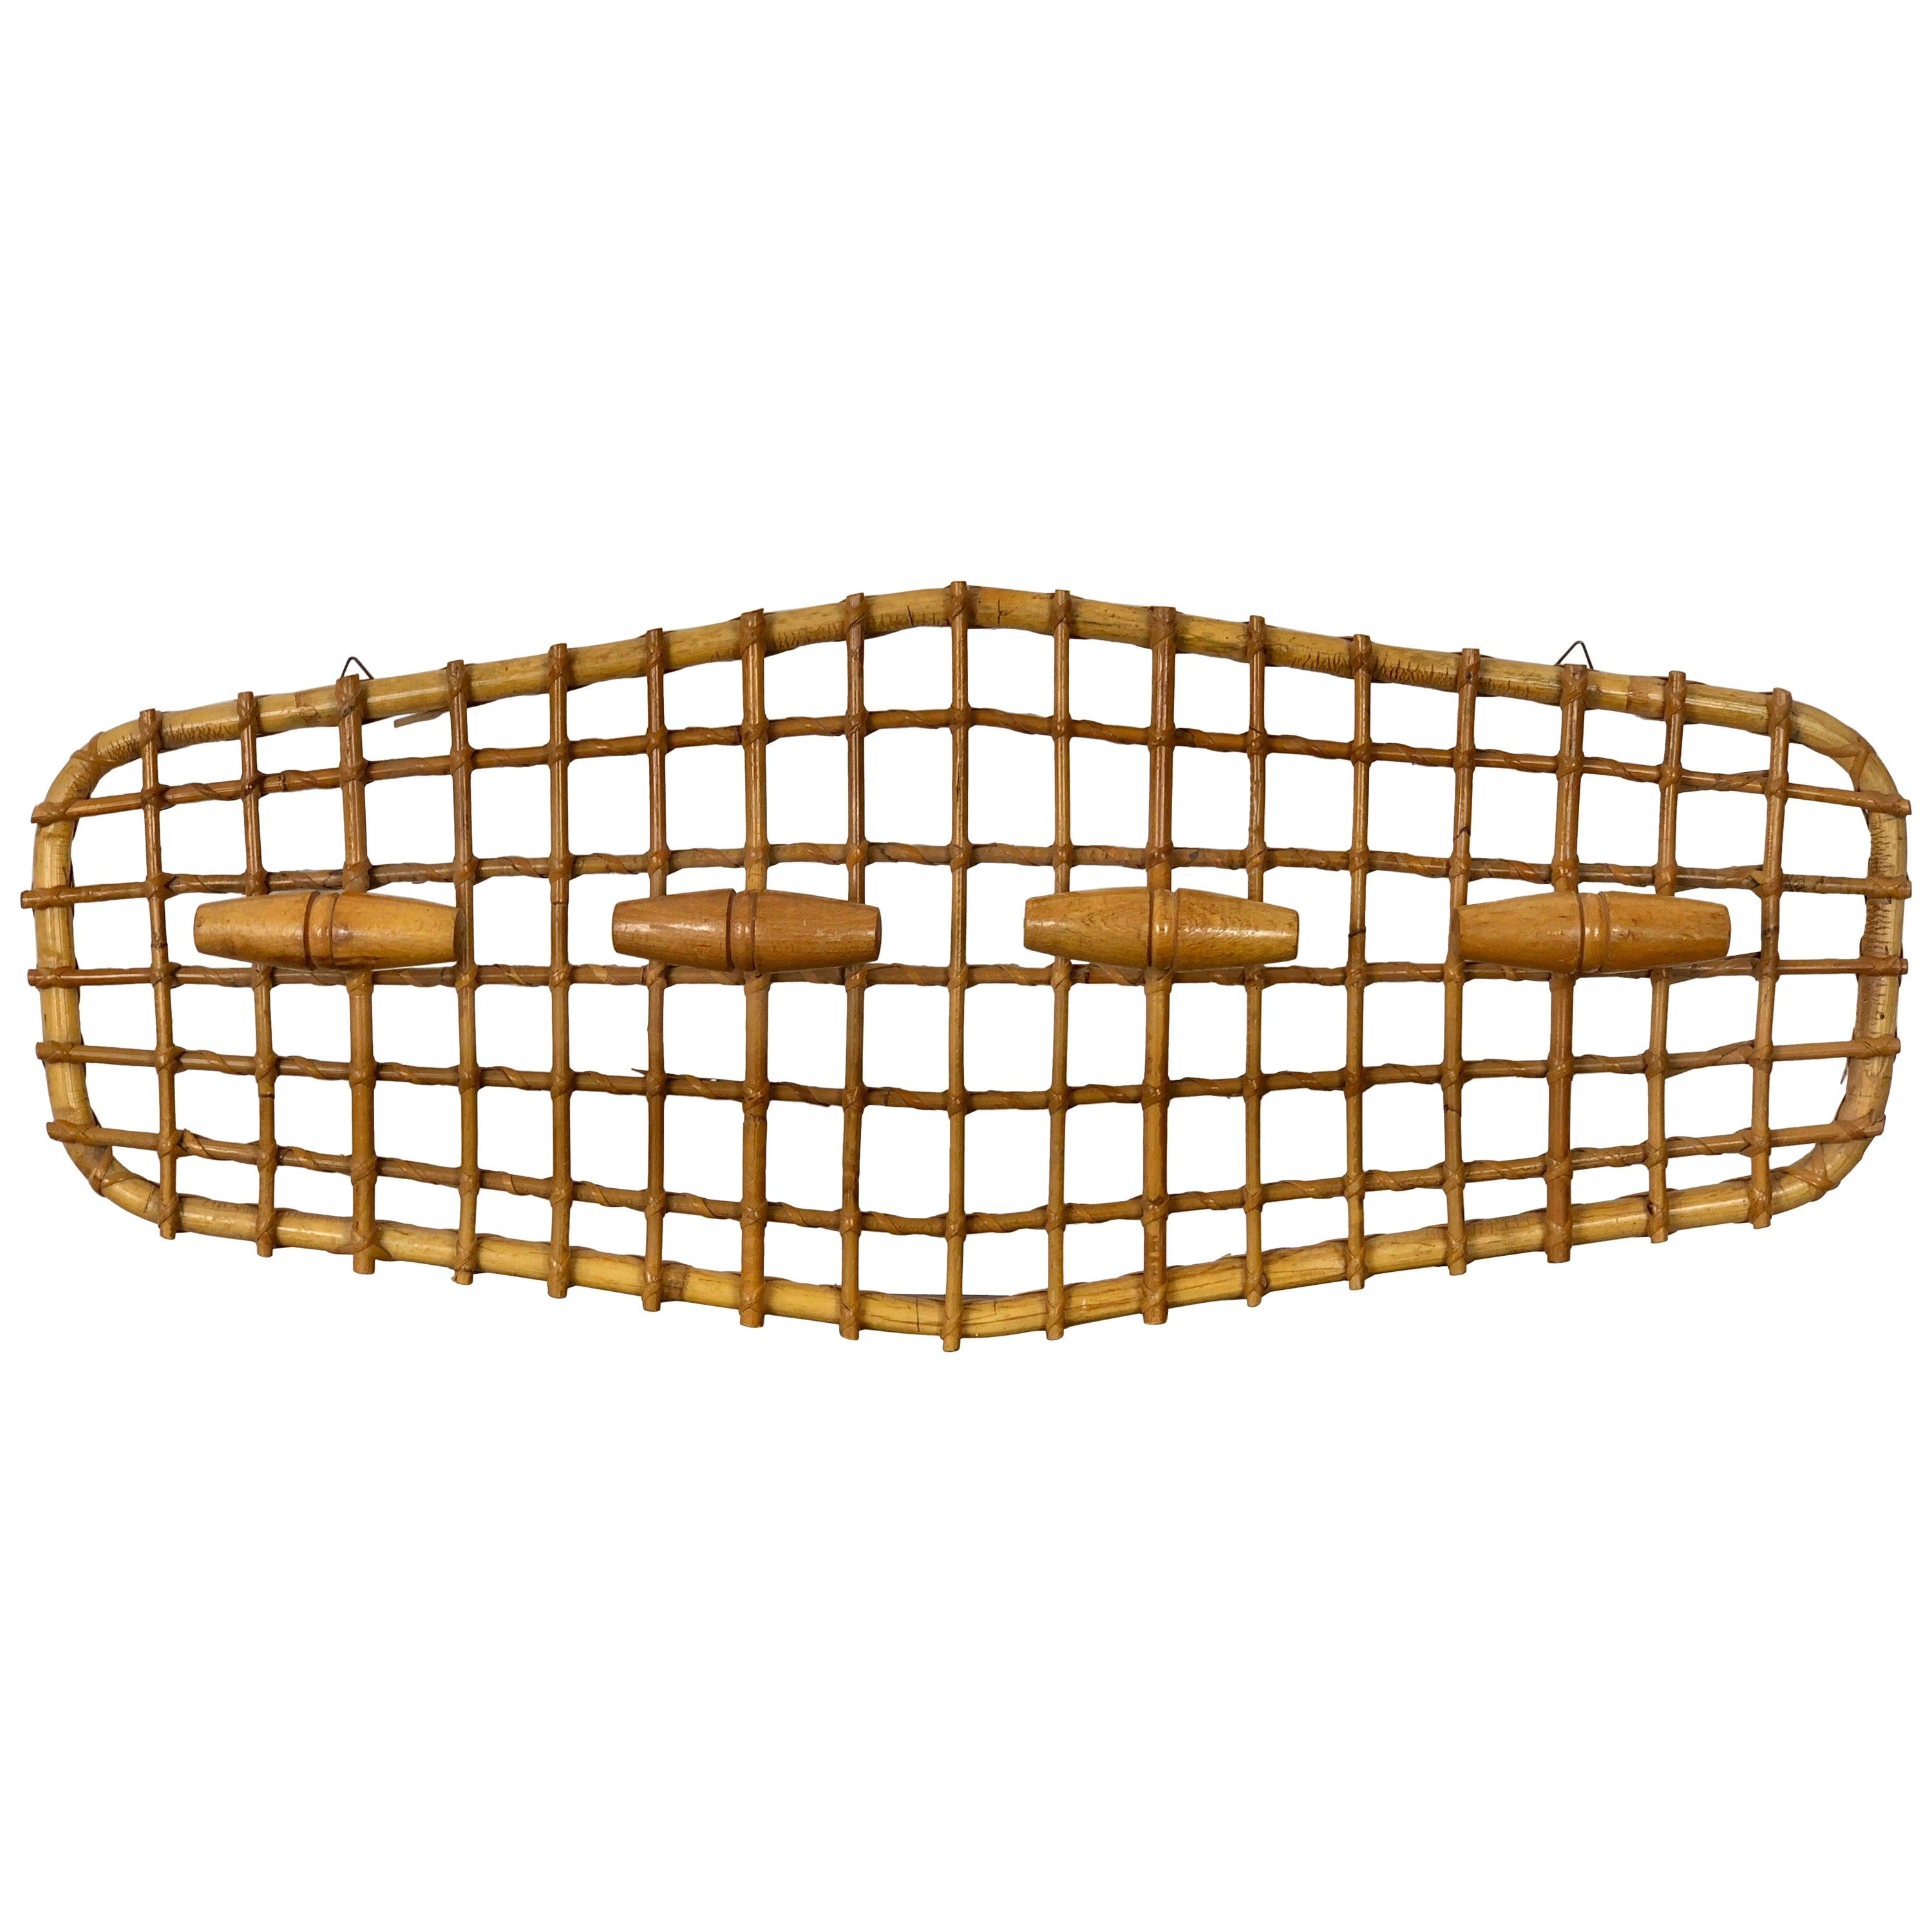 Bamboo Midcentury Coat Hanger Design Attributed to Olaf von Bohr, Italy, 1950s